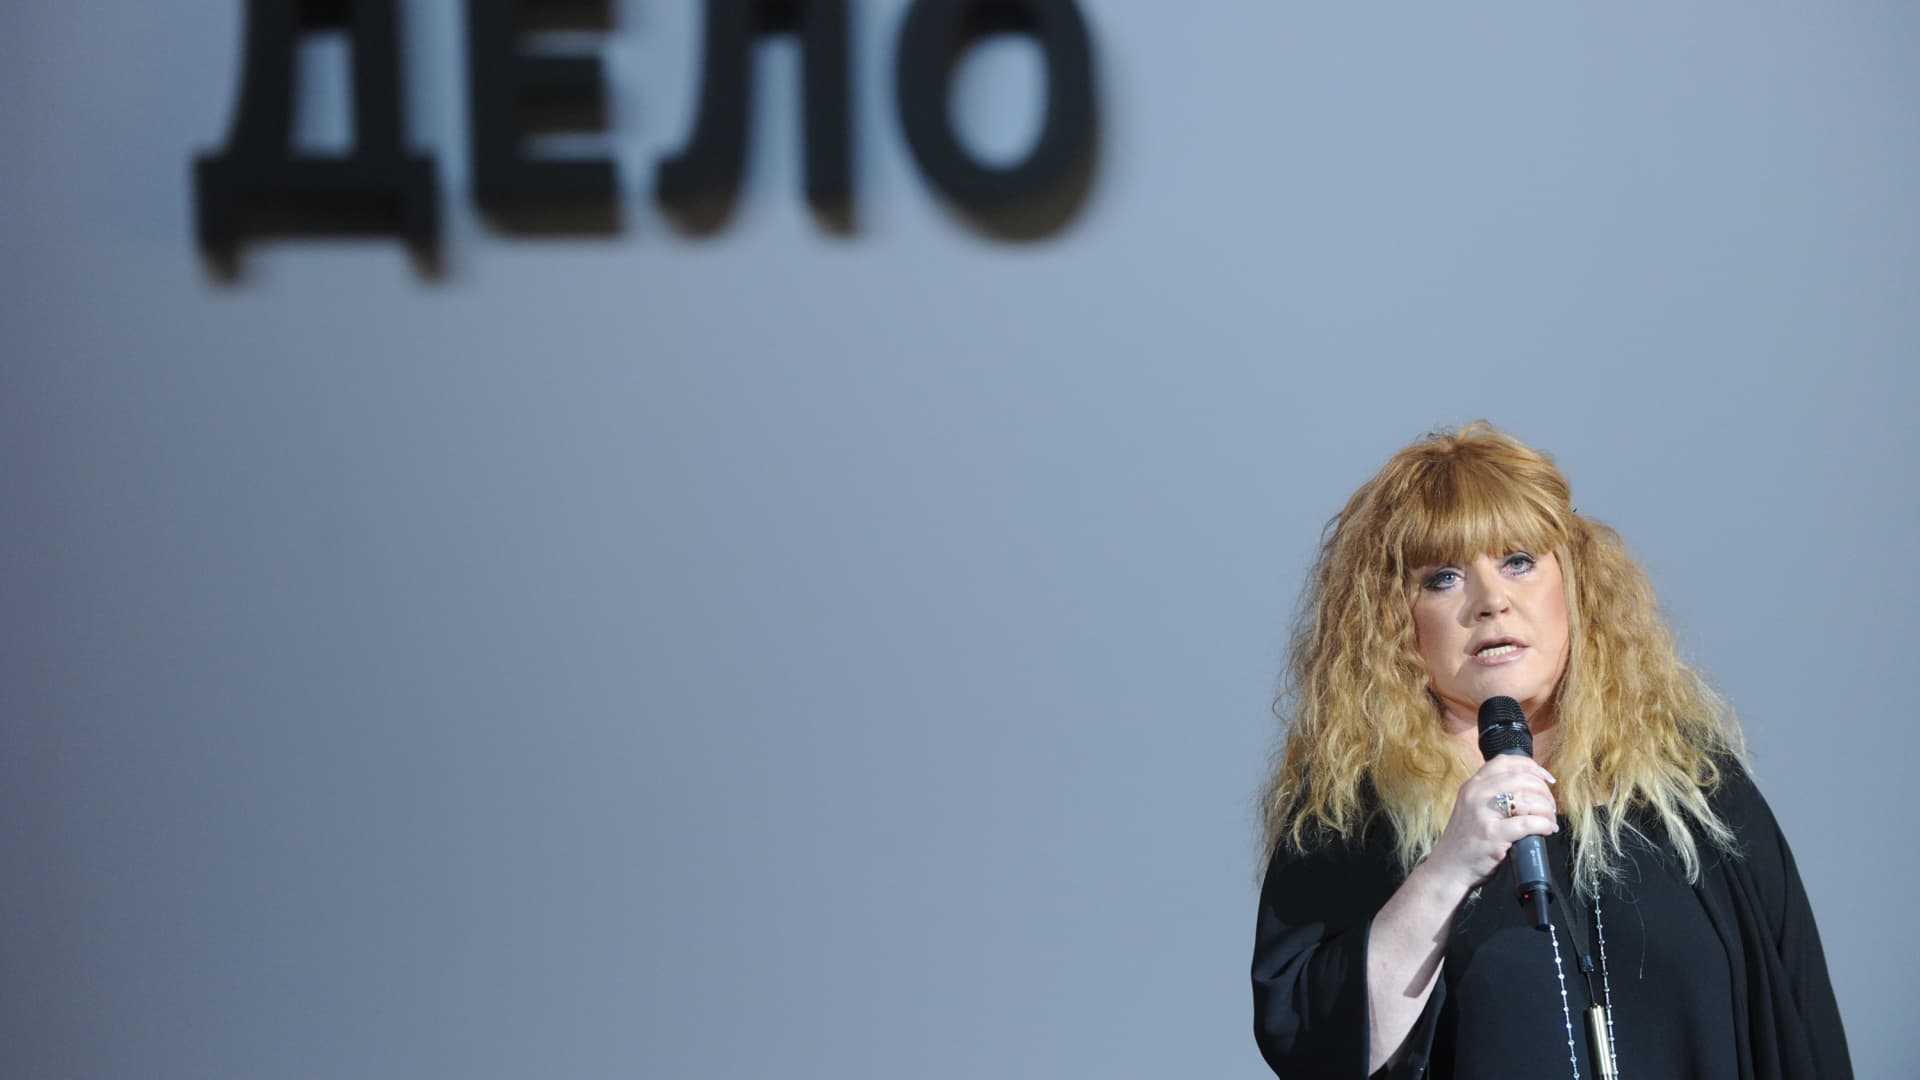 Russian pop singer Alla Pugacheva speaks at a congress of pro-reform Pravoye Delo (A Just Cause) party in Moscow, on Sept. 15, 2011, with the party's logo in the background.